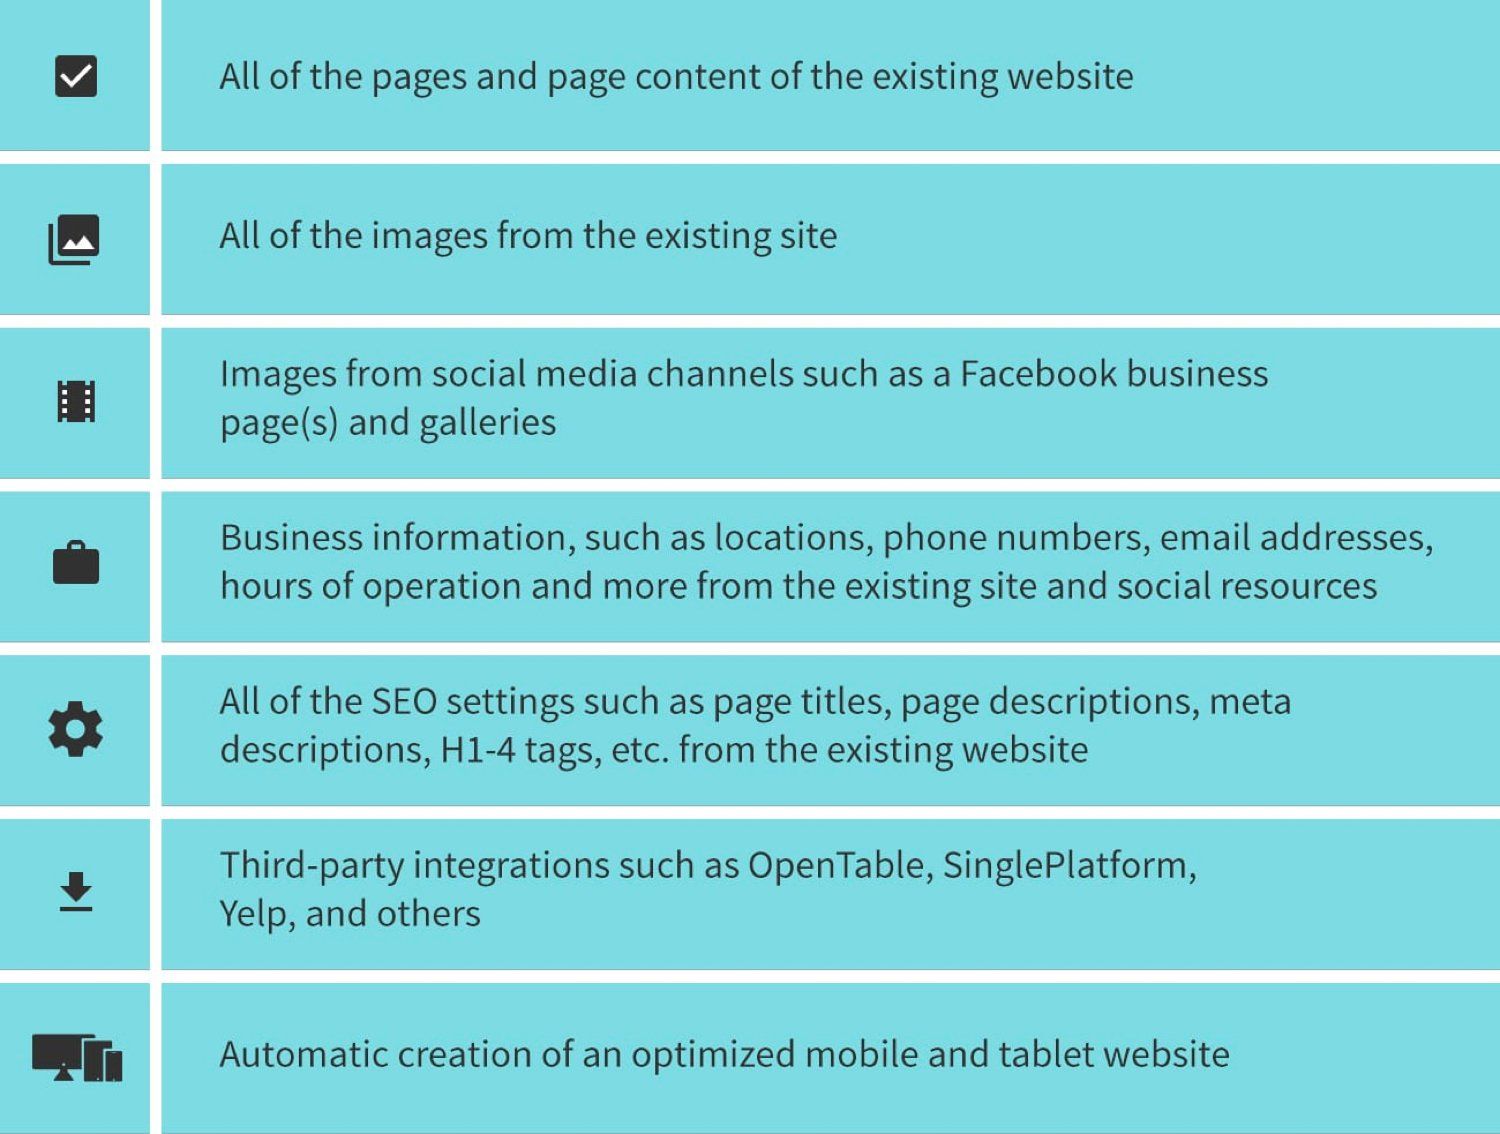 A list of things that can be copied from an existing website in a website migration.